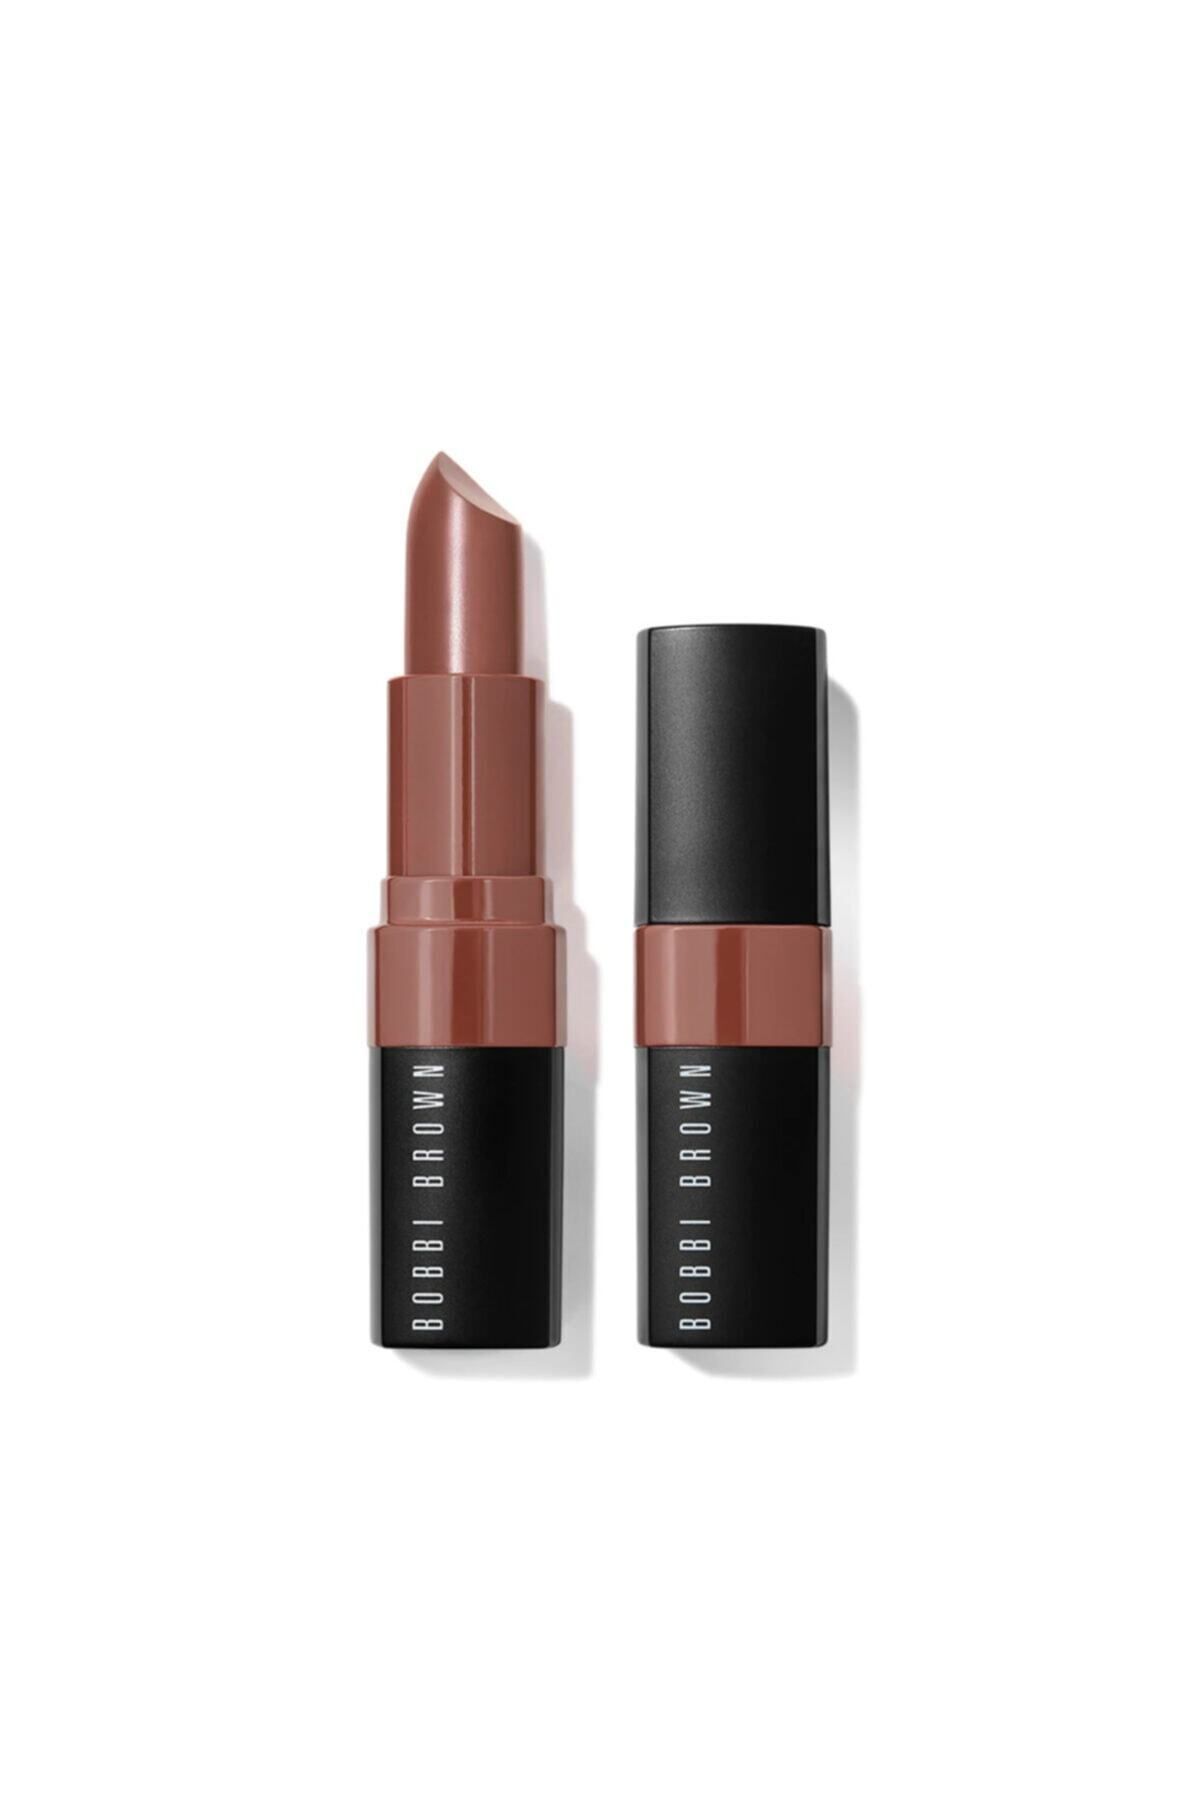 Bobbi Brown COCOA - INTENSELY PİGMENTED CRUSHED LİP COLOR SATİN FİNİSH MATTE LİPSTİCK - 3.4 G PSSN1378